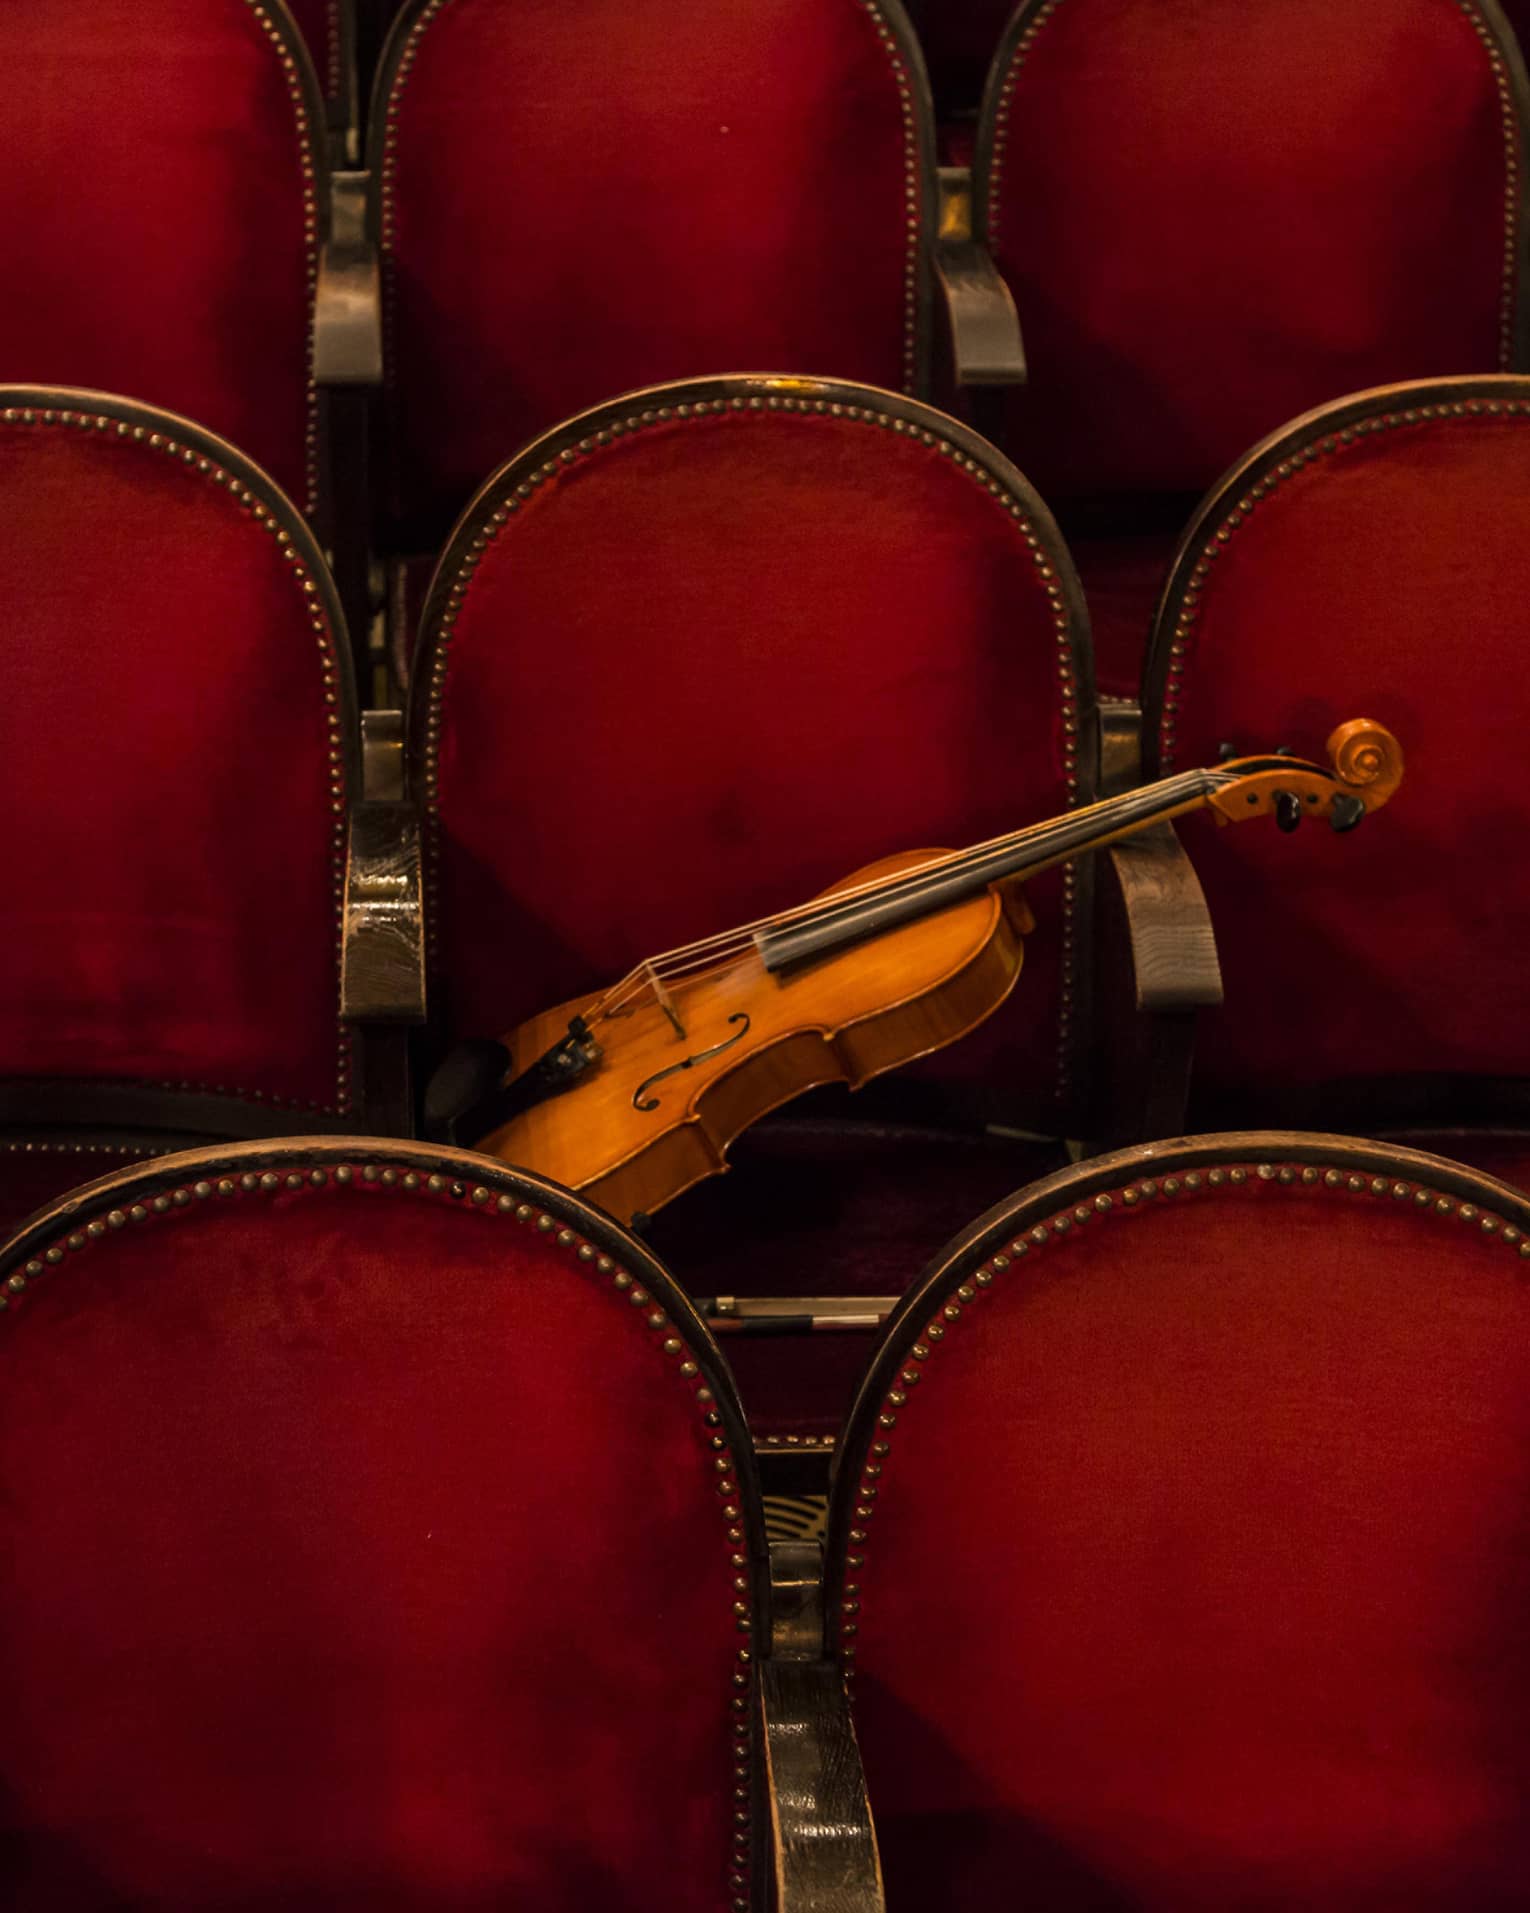 Red theatre chairs with a violin resting on one.